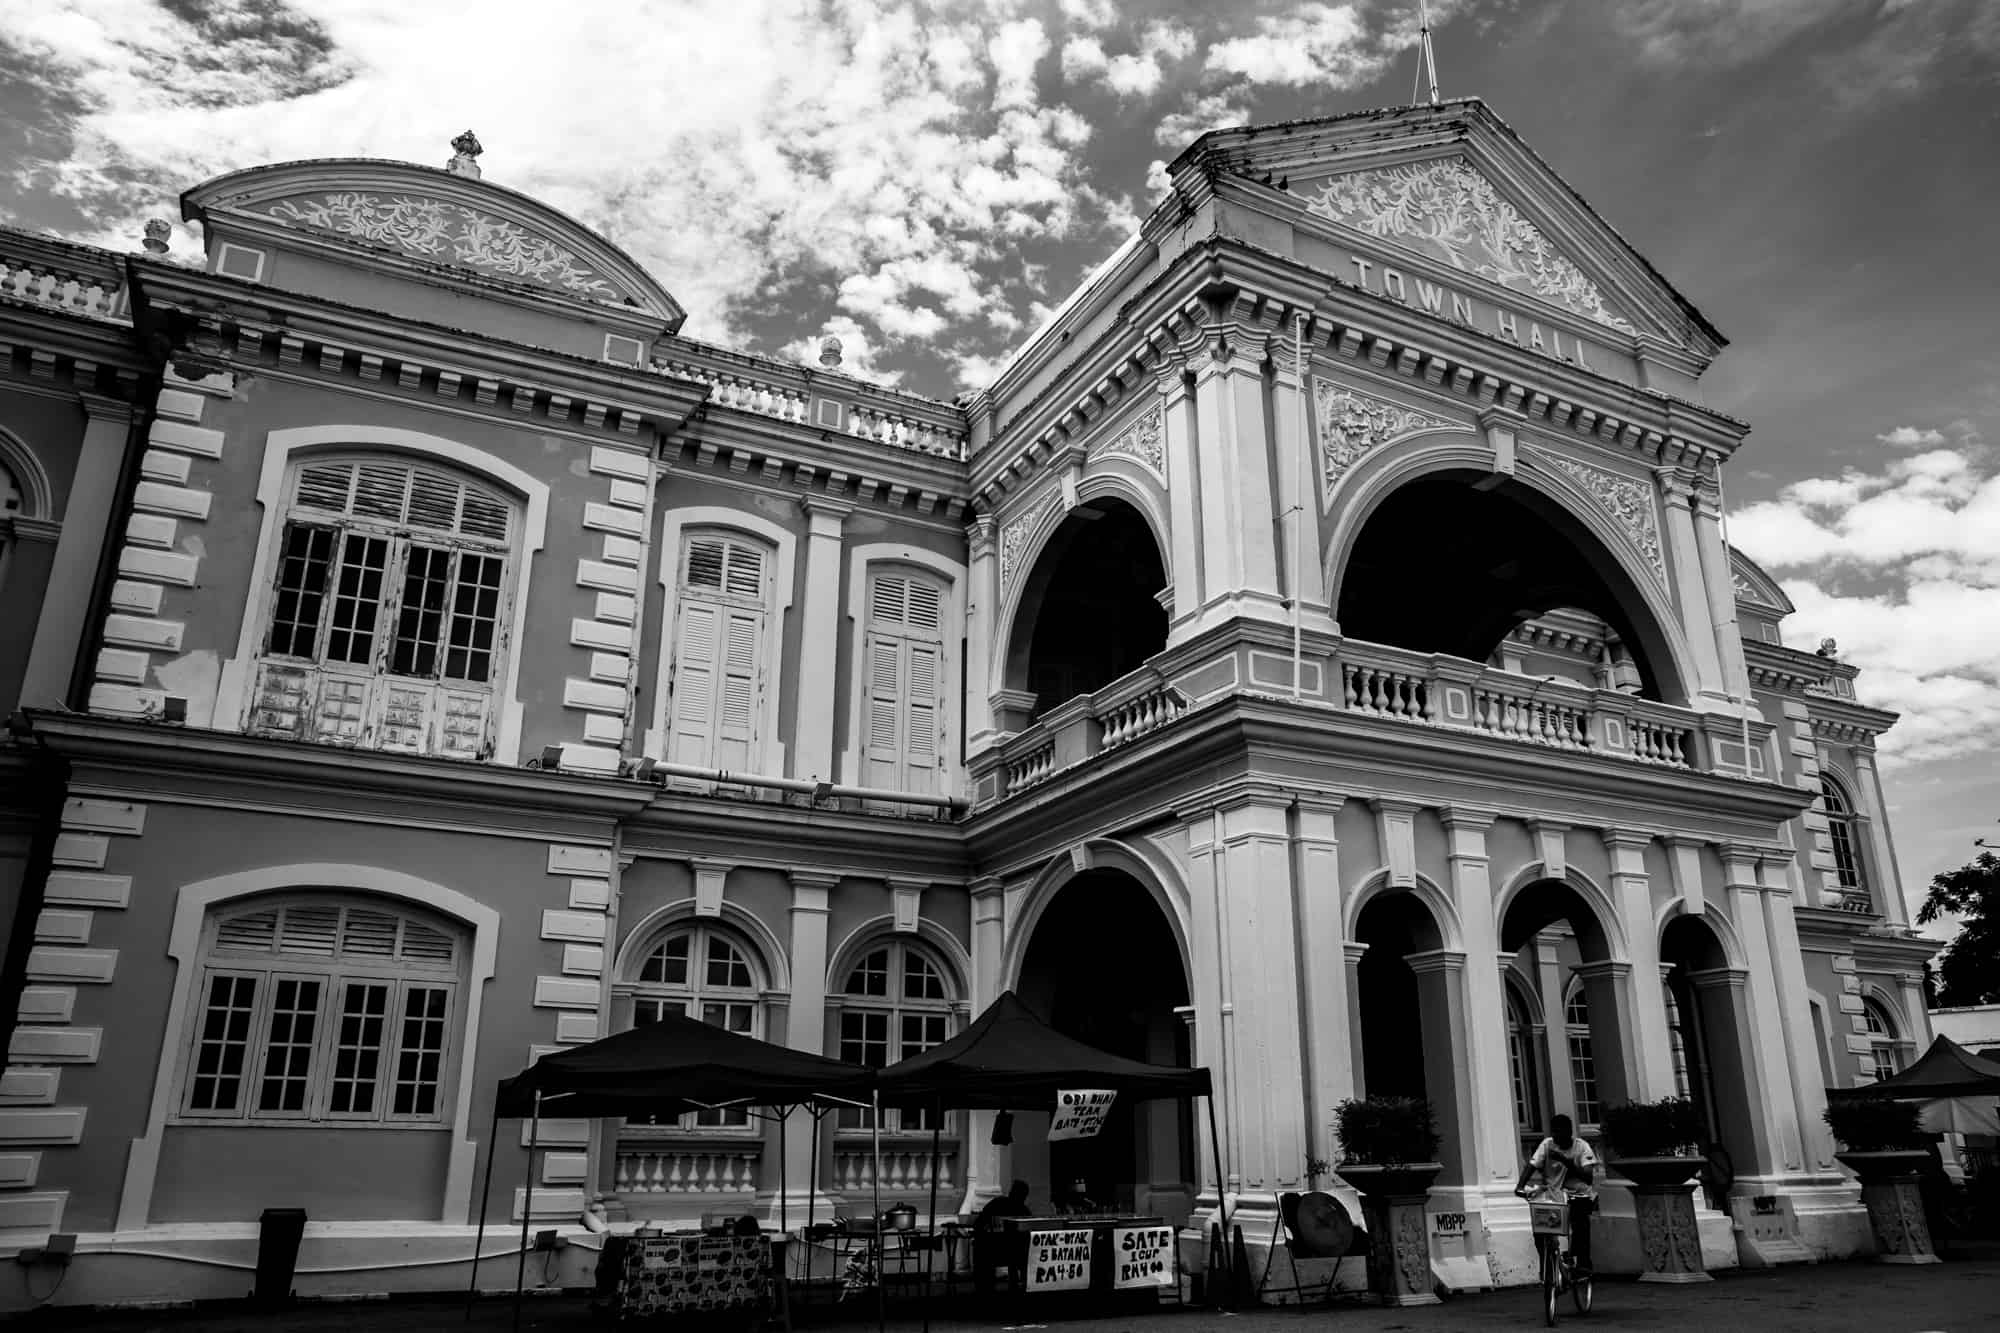 Town Hall, George Town, Penang